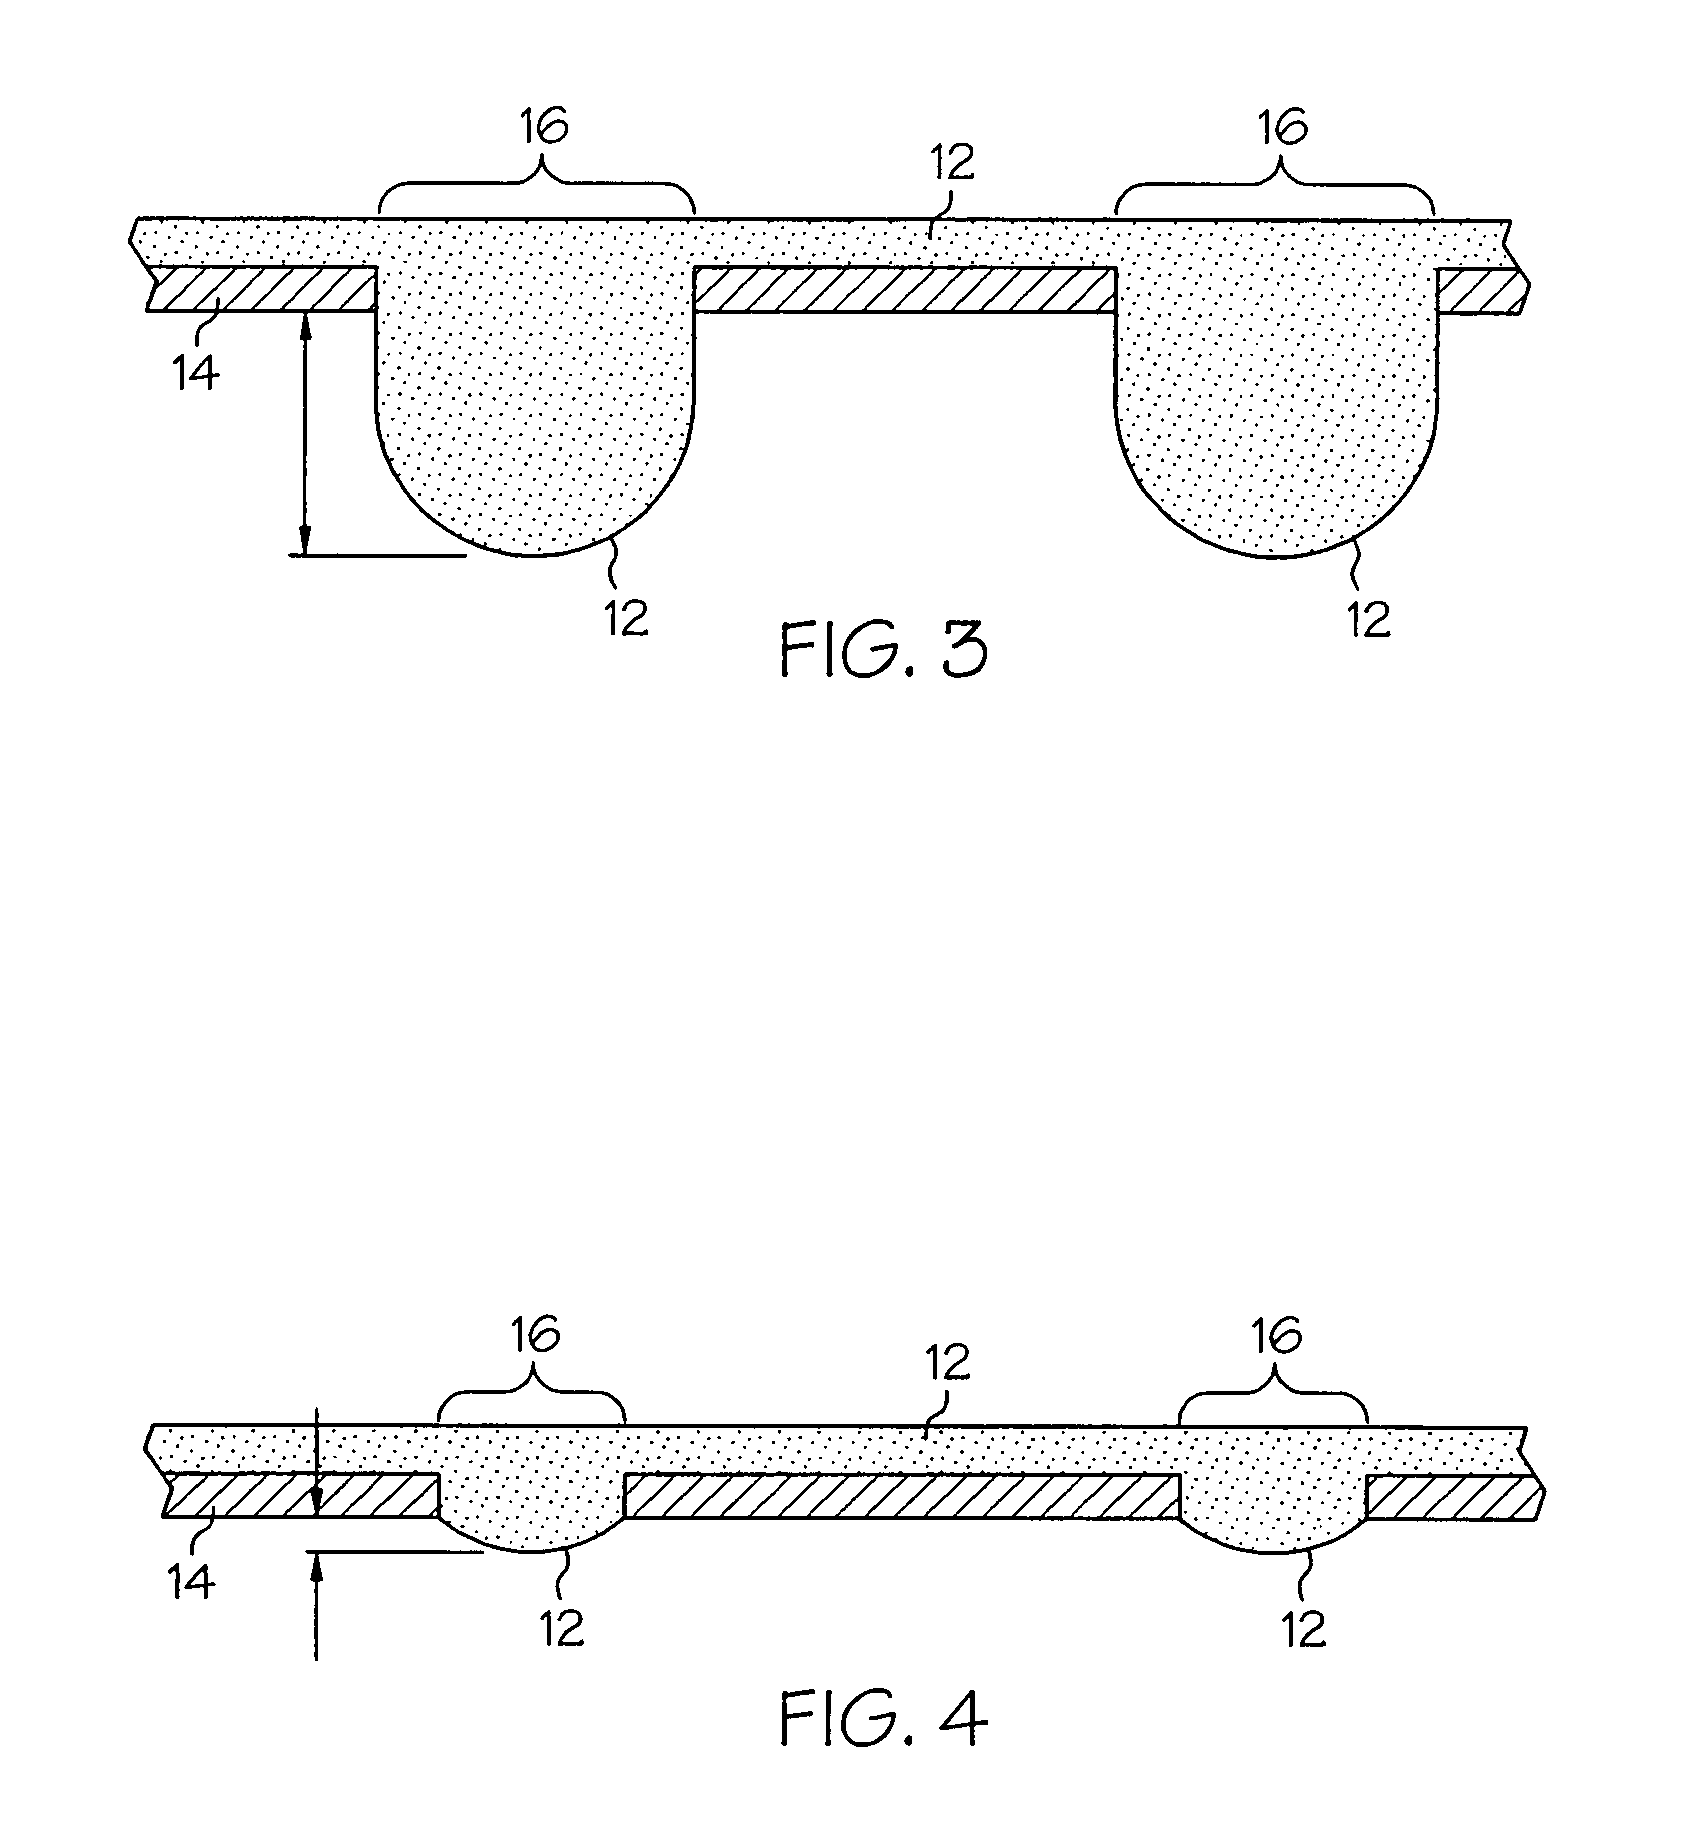 Method of providing flow control of heat activated sealant using a combination sealant/flow control agent